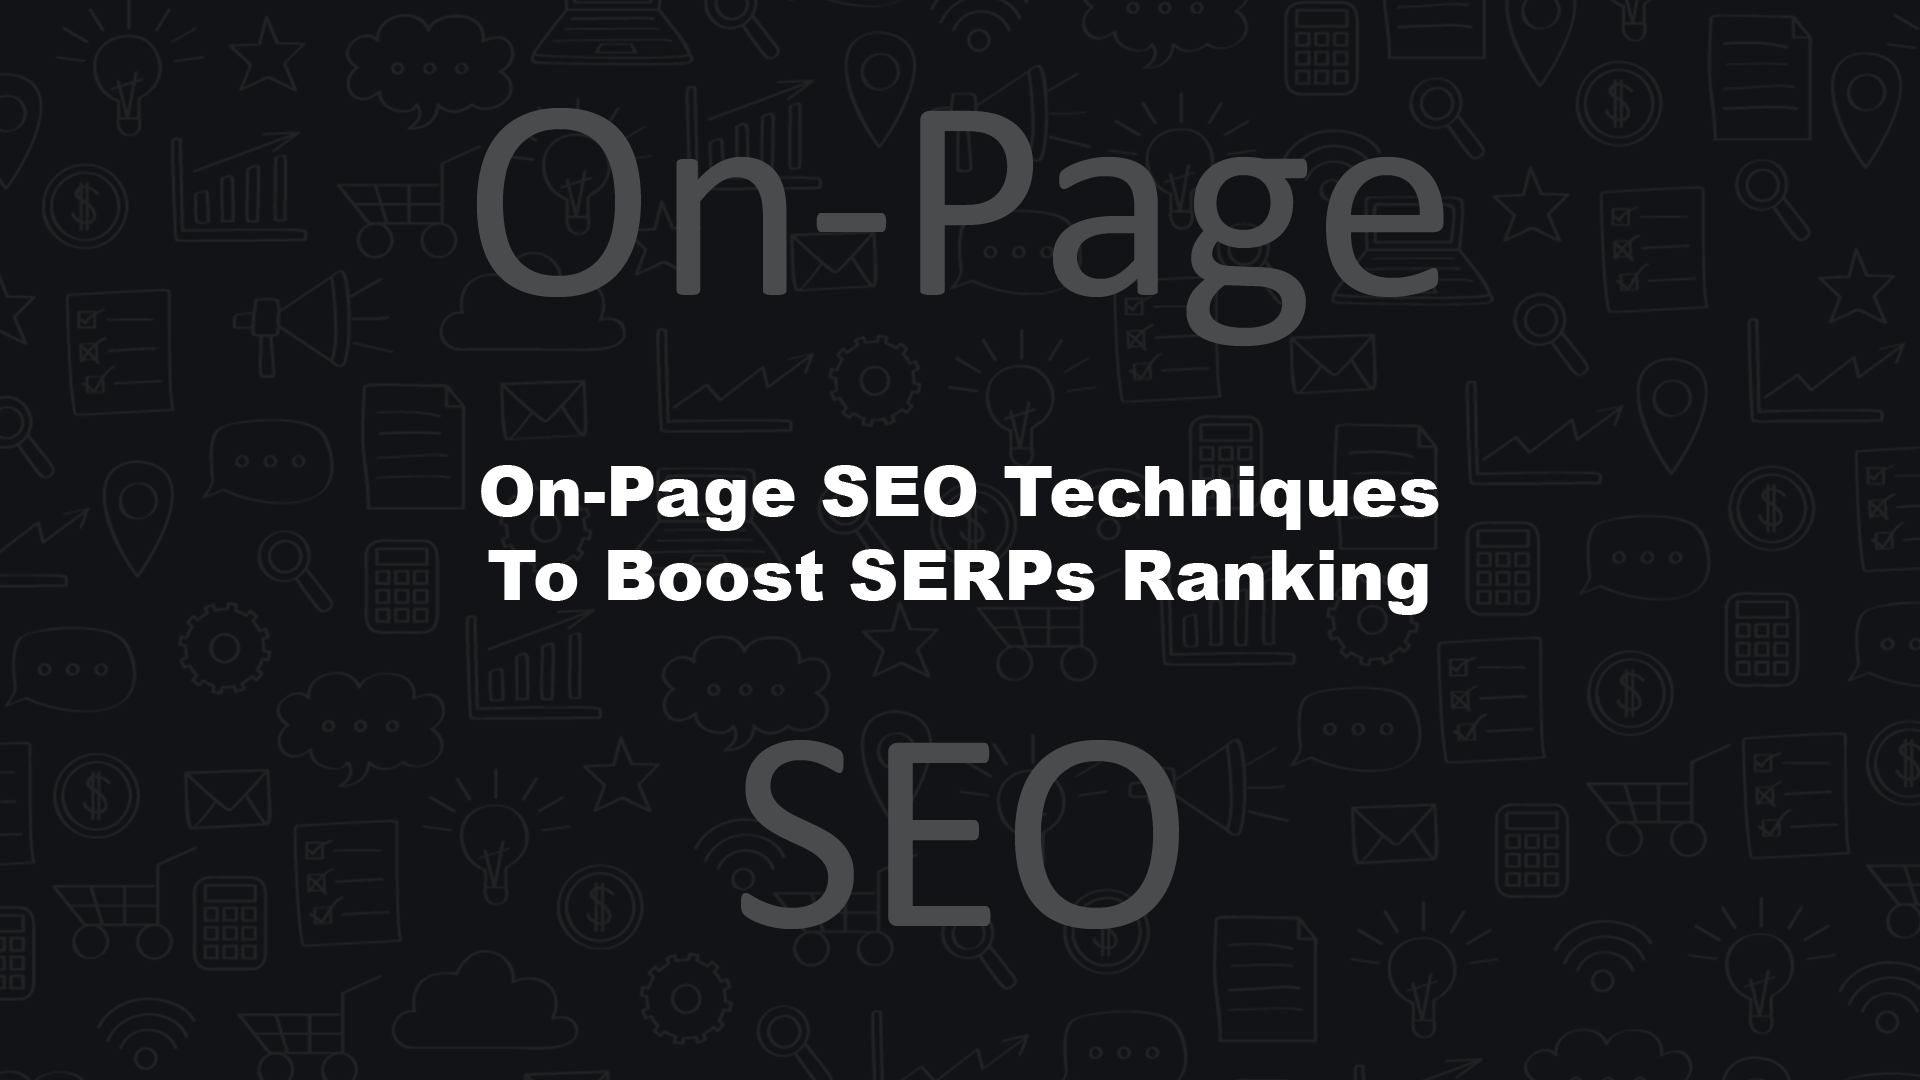 On-Page SEO Techniques To Boost SERPs Ranking